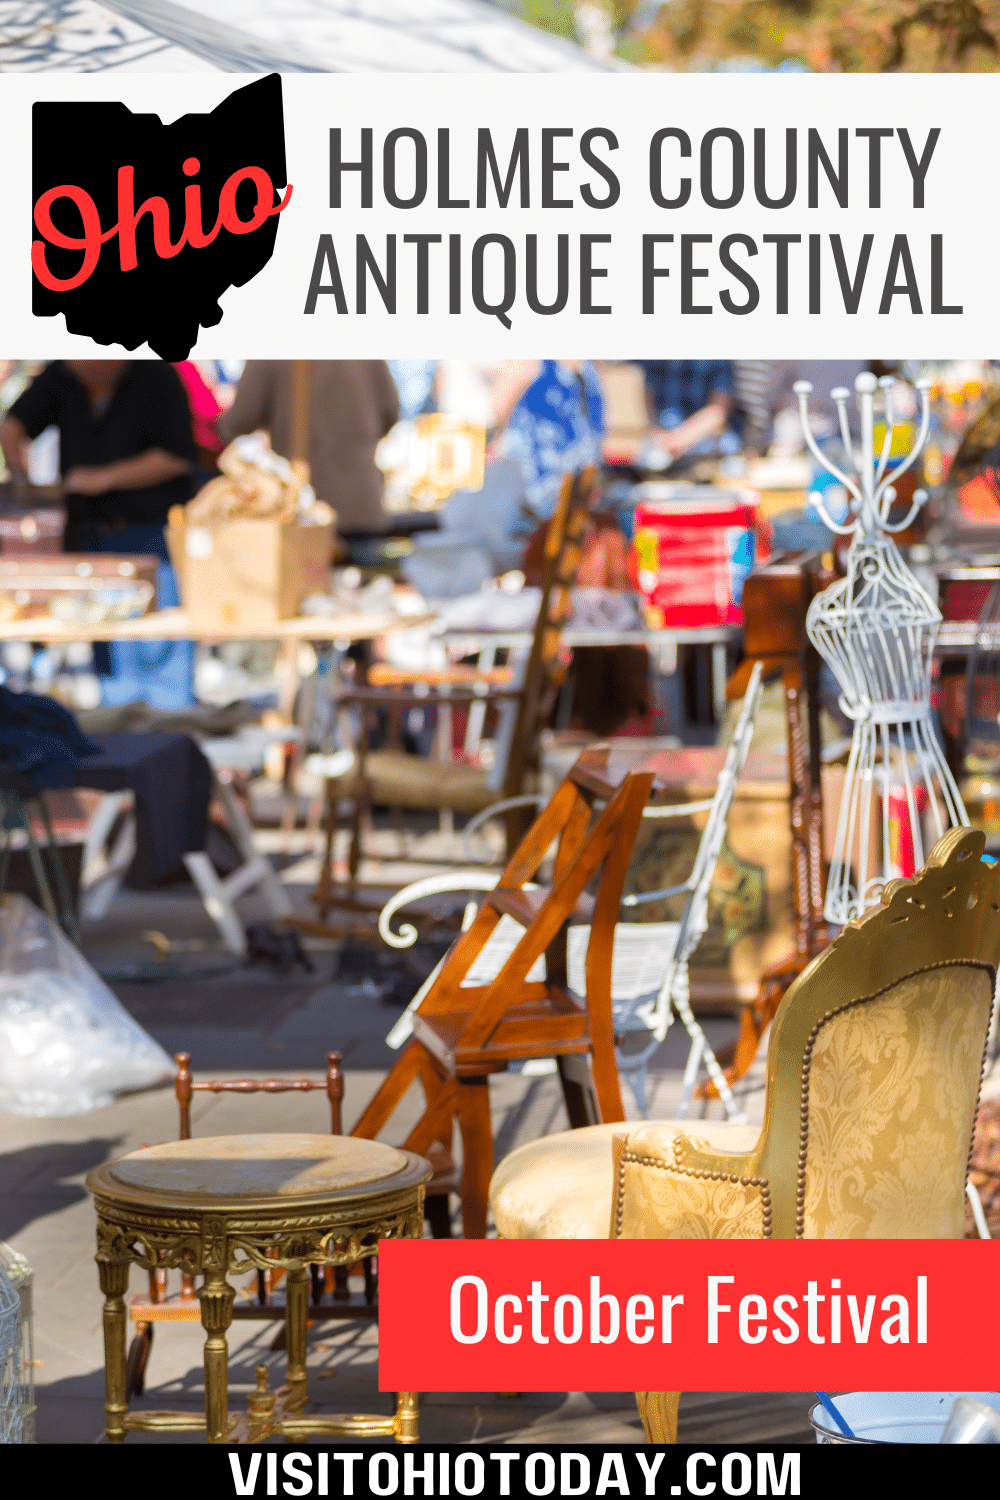 The Holmes County Antique Festival is two days of markets, arts and crafts, and demonstrations, October 7 and 8, 2023.